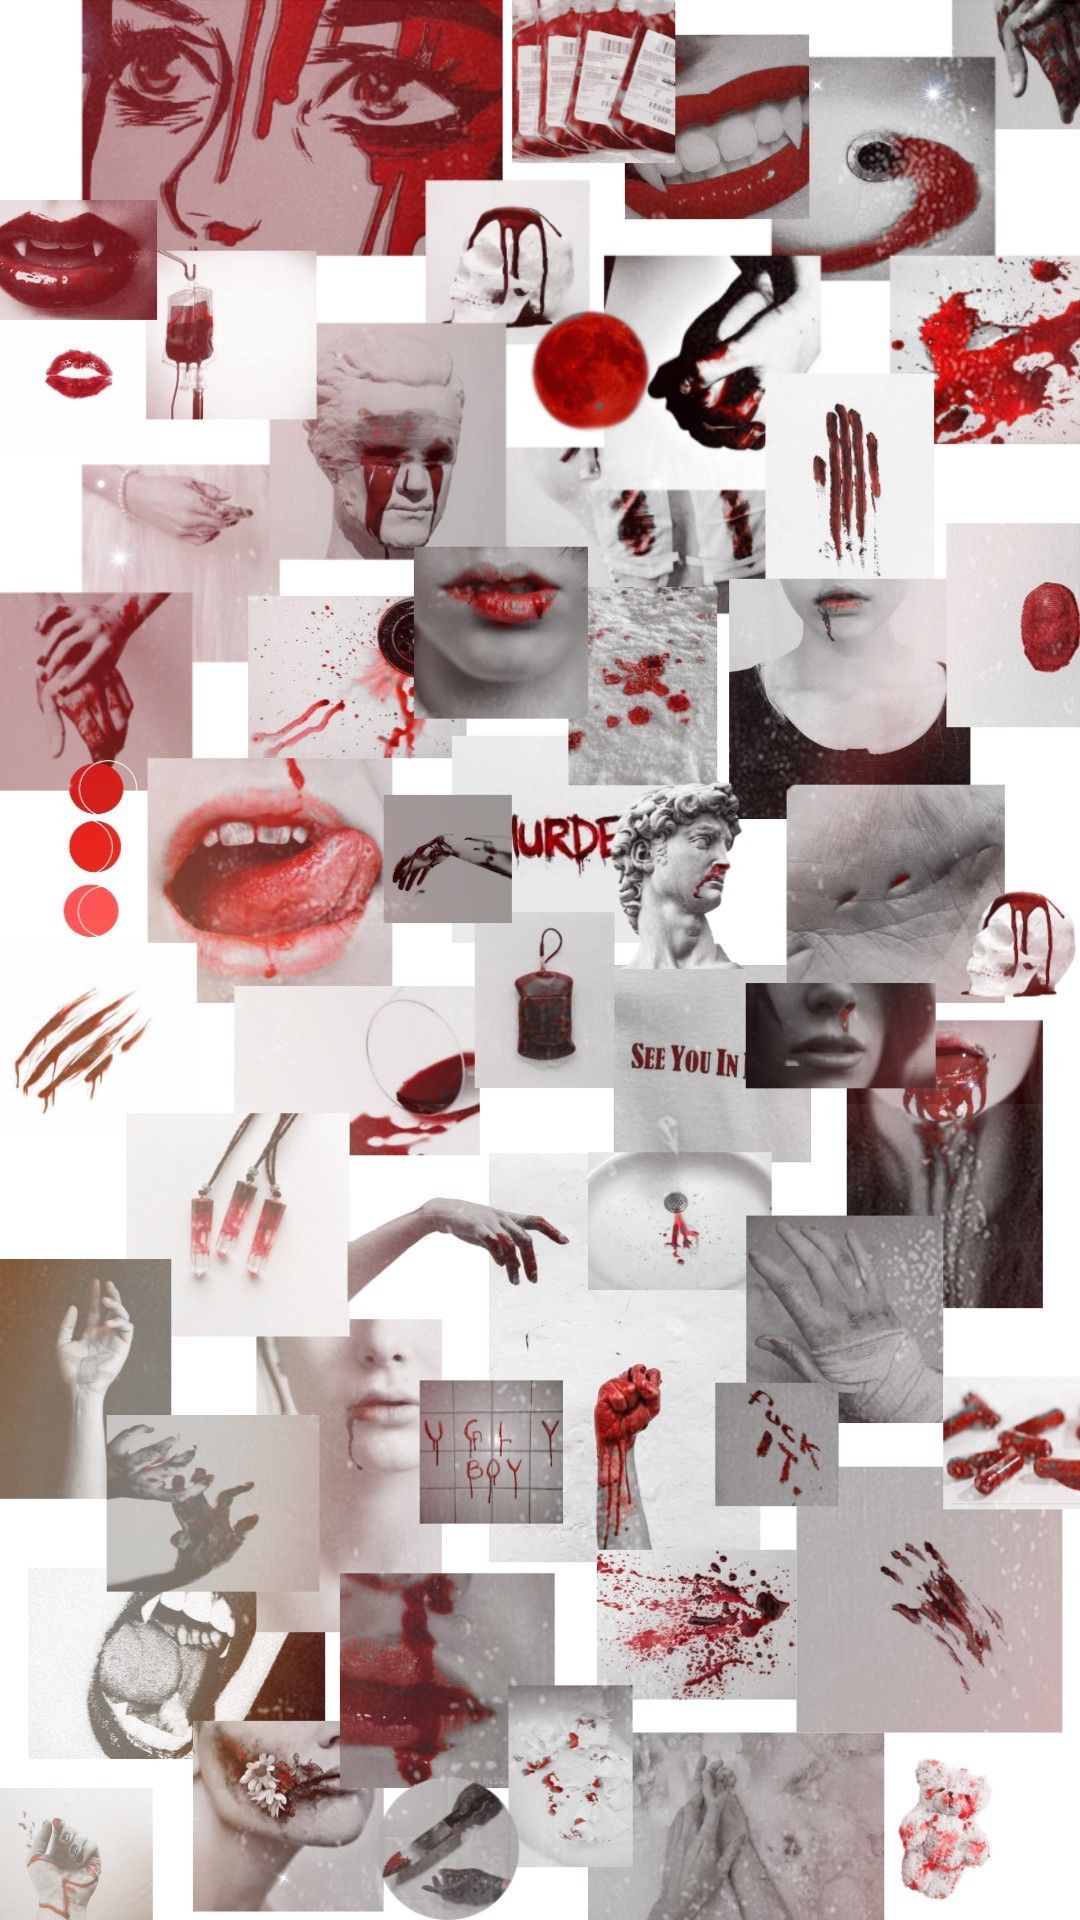 Aesthetic red collage wallpaper for phone and desktop. - Blood, vampire